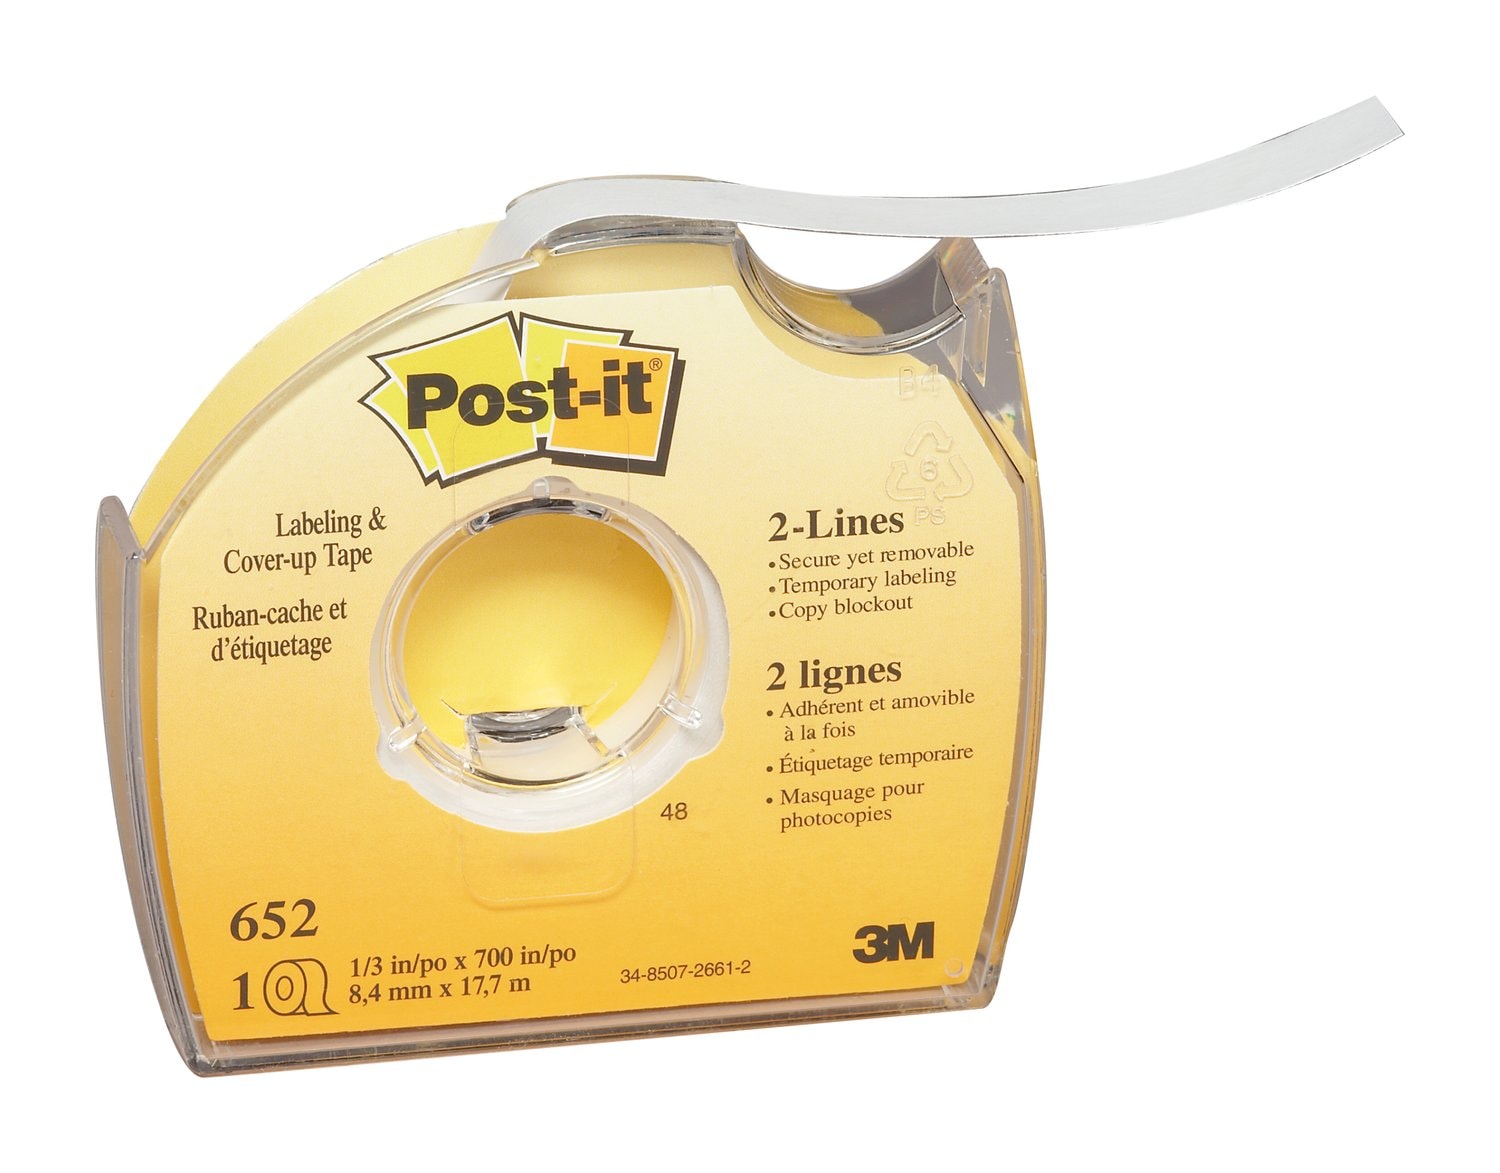 7000002171 - Post-it Labeling and Cover-Up Tape 652, 1/3 in x 700 in